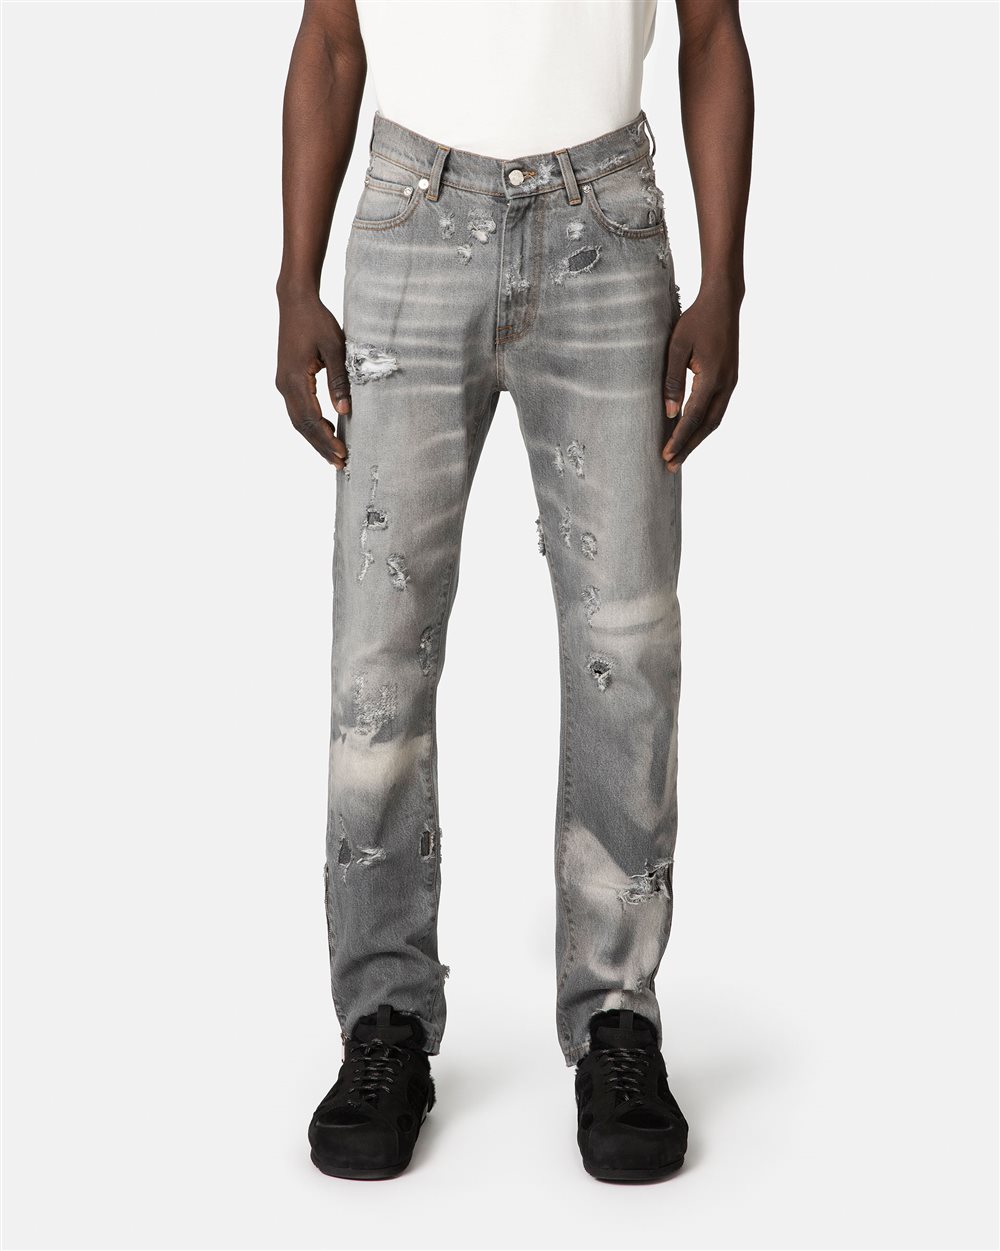 Gray washed jeans 5 pockets - Iceberg - Official Website